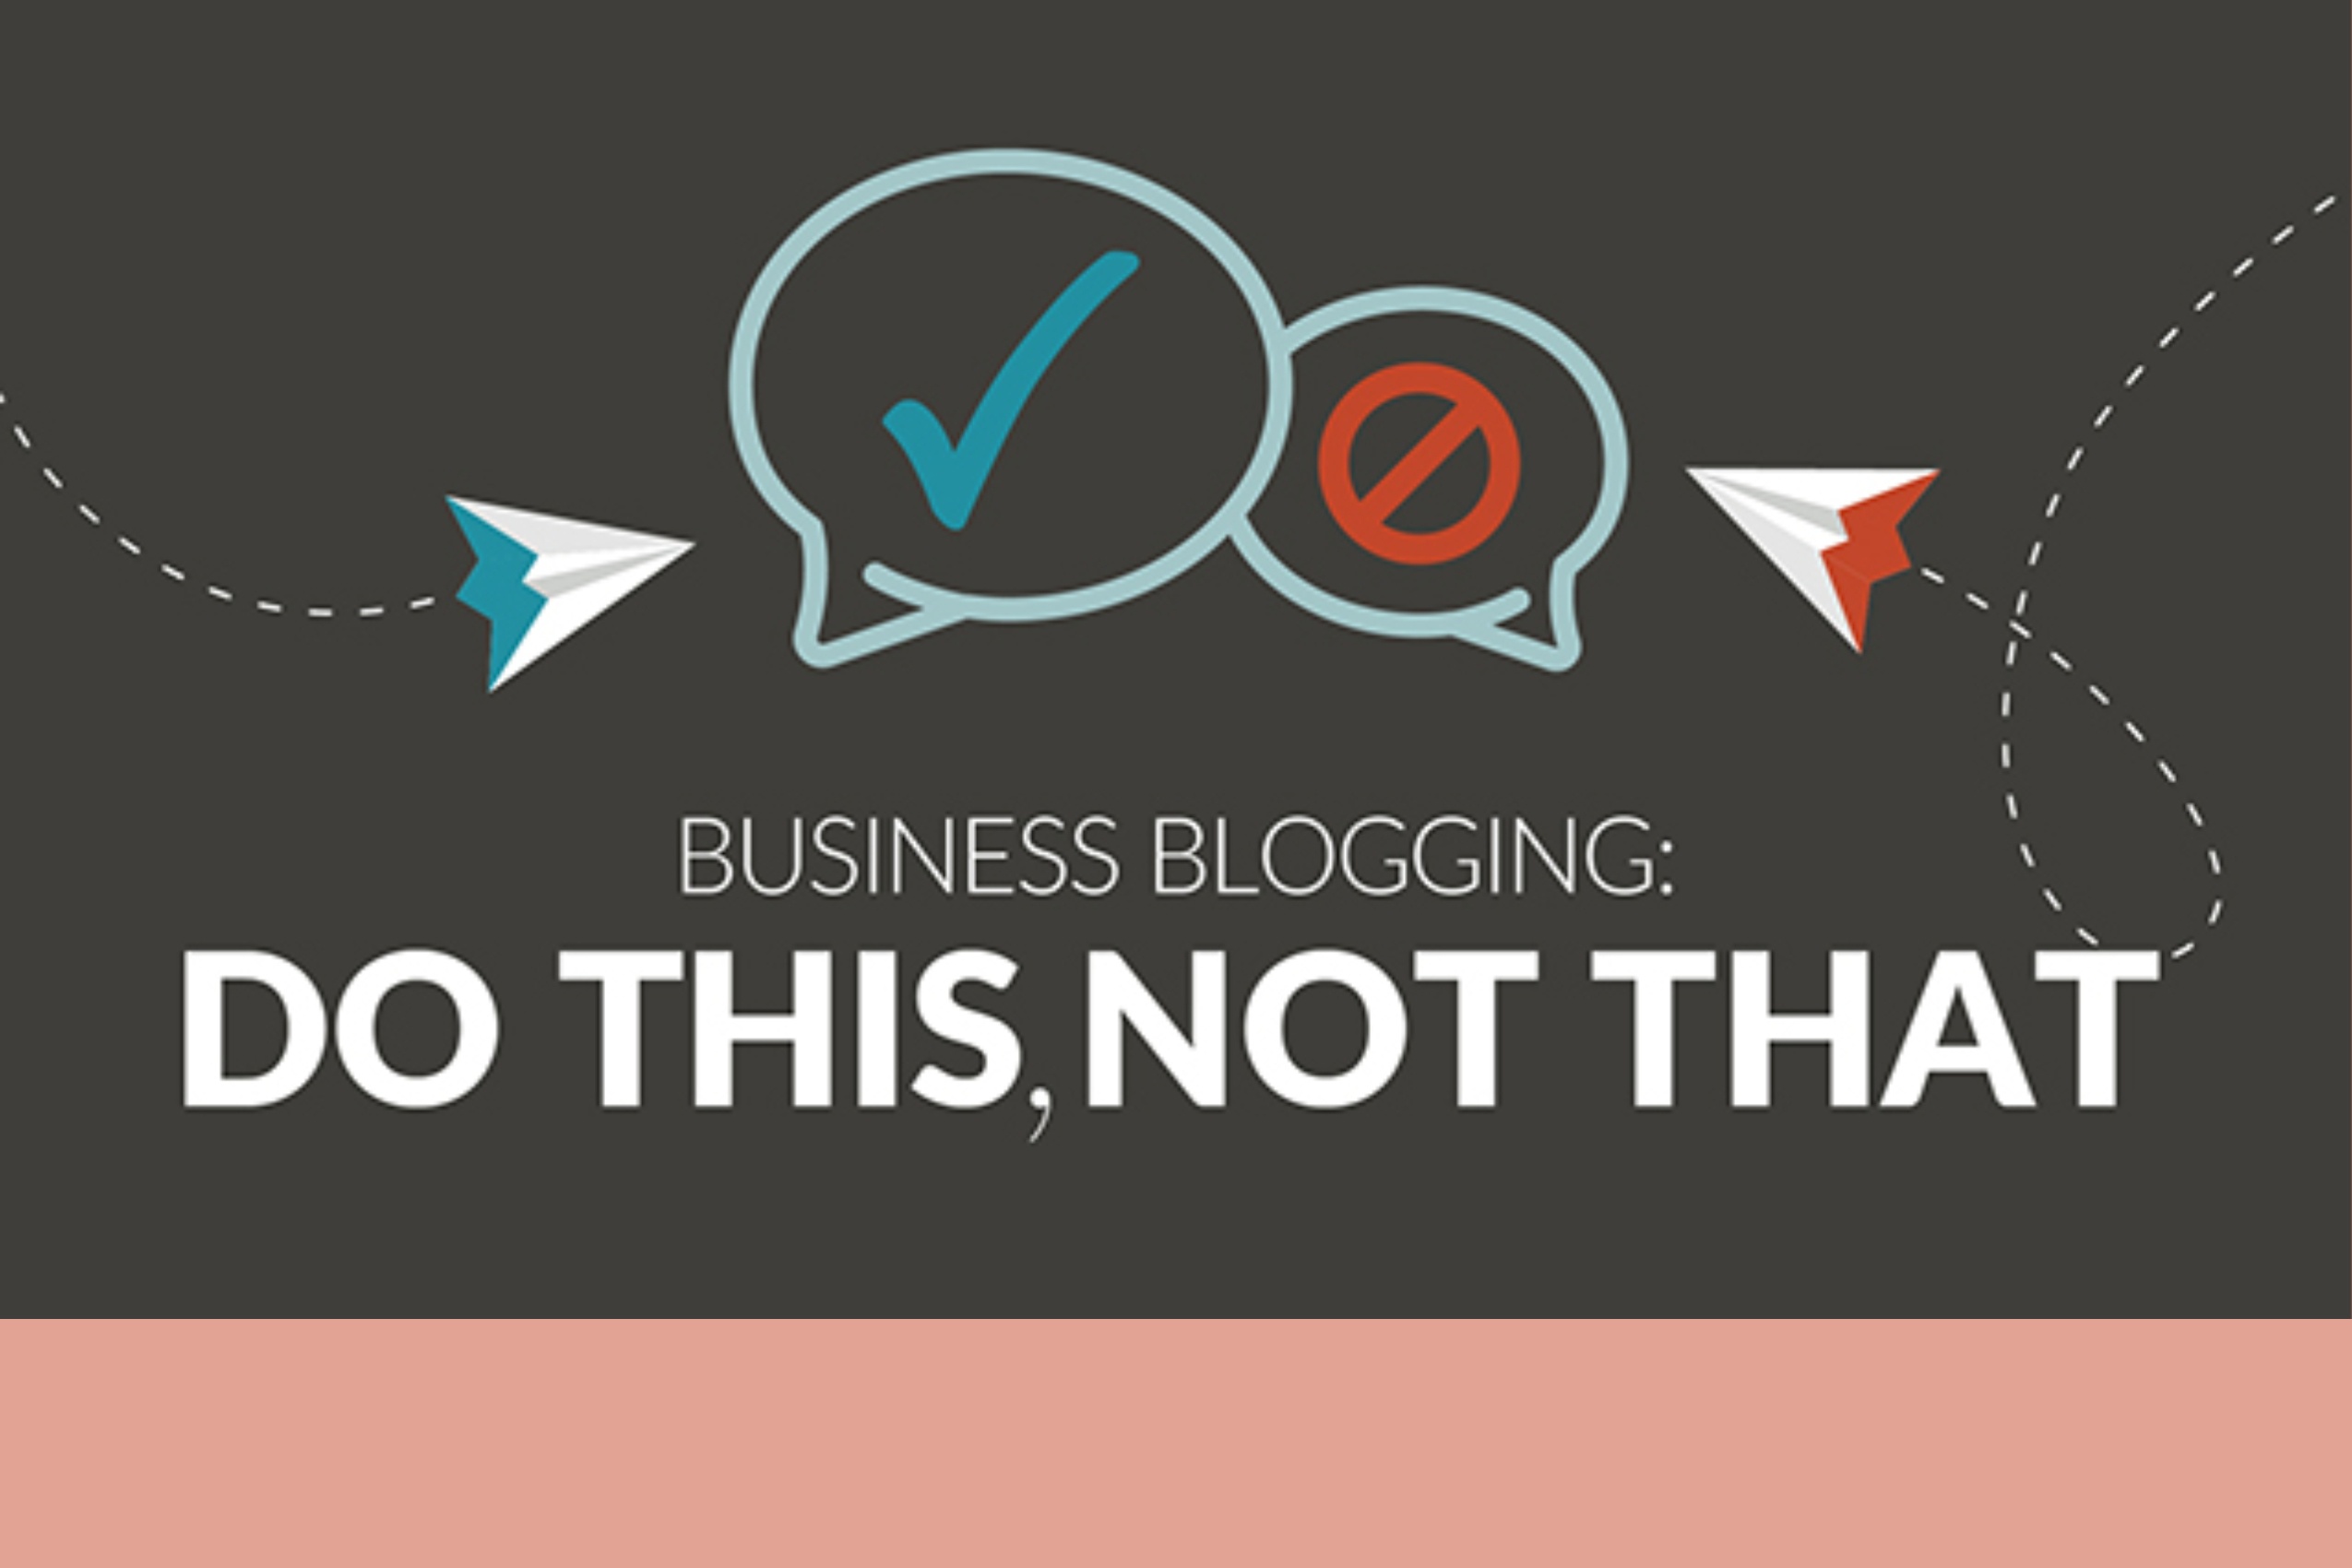 15 Business Blog Mistakes & Quick Fixes (infographic)